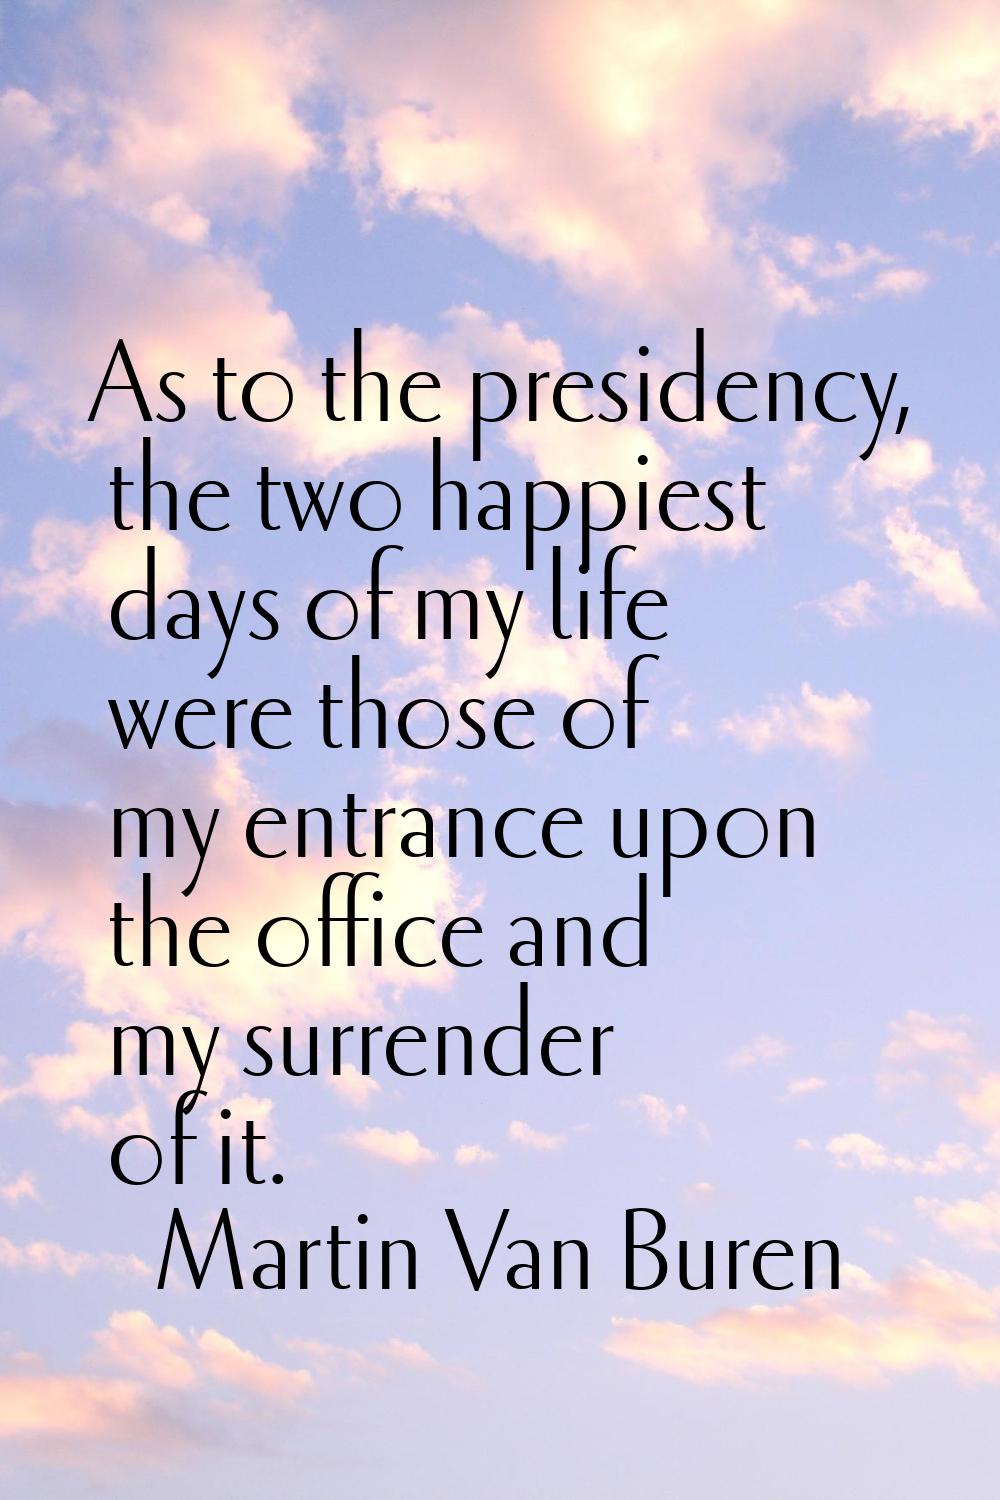 As to the presidency, the two happiest days of my life were those of my entrance upon the office an